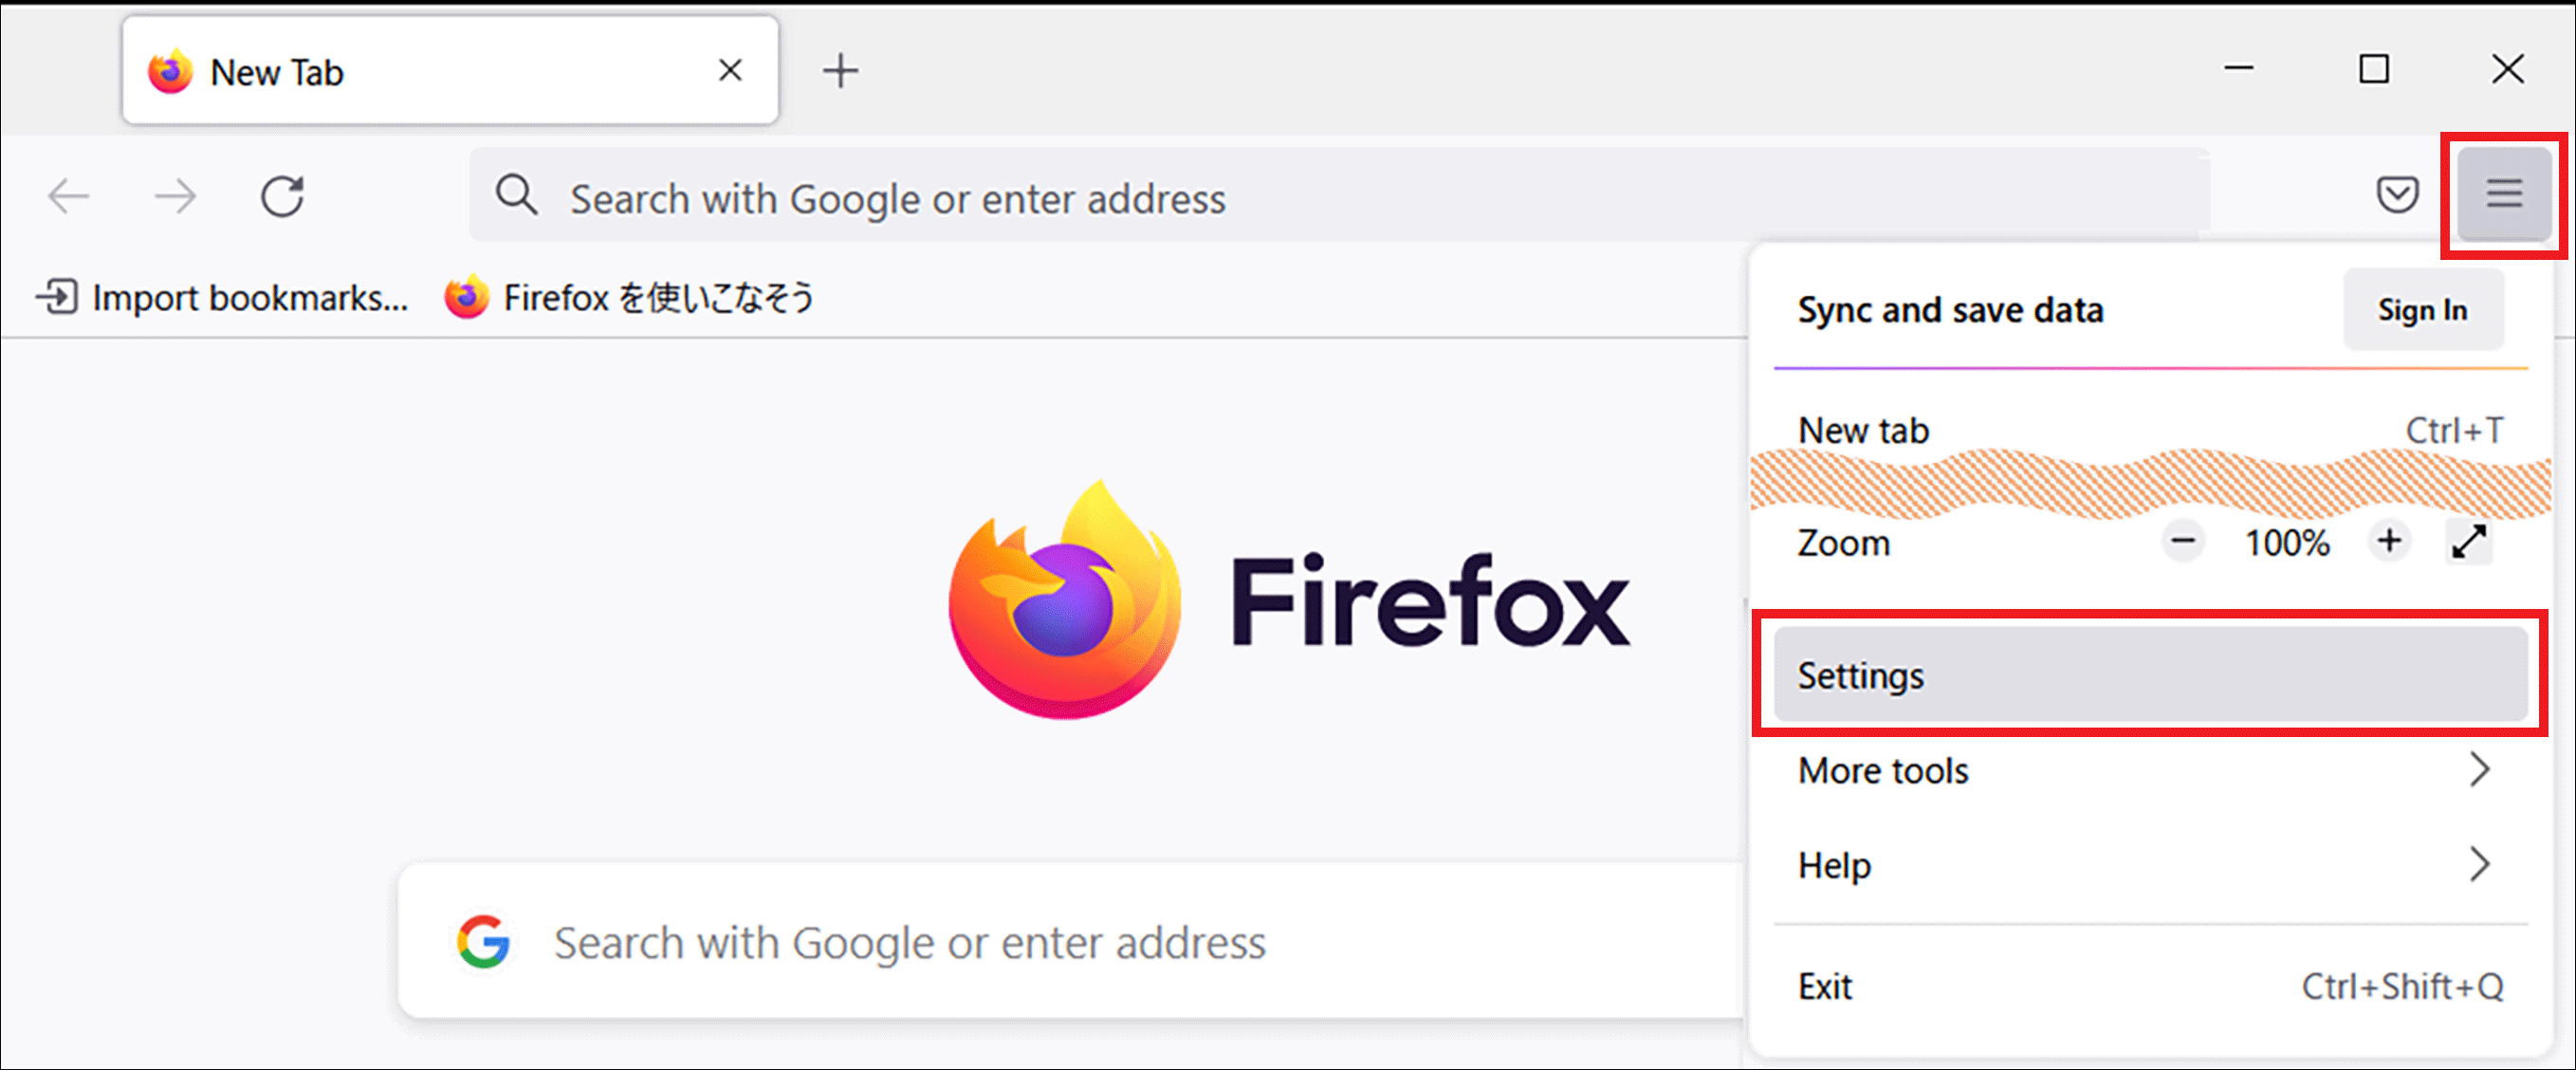 Setting change for Firefox users [1]